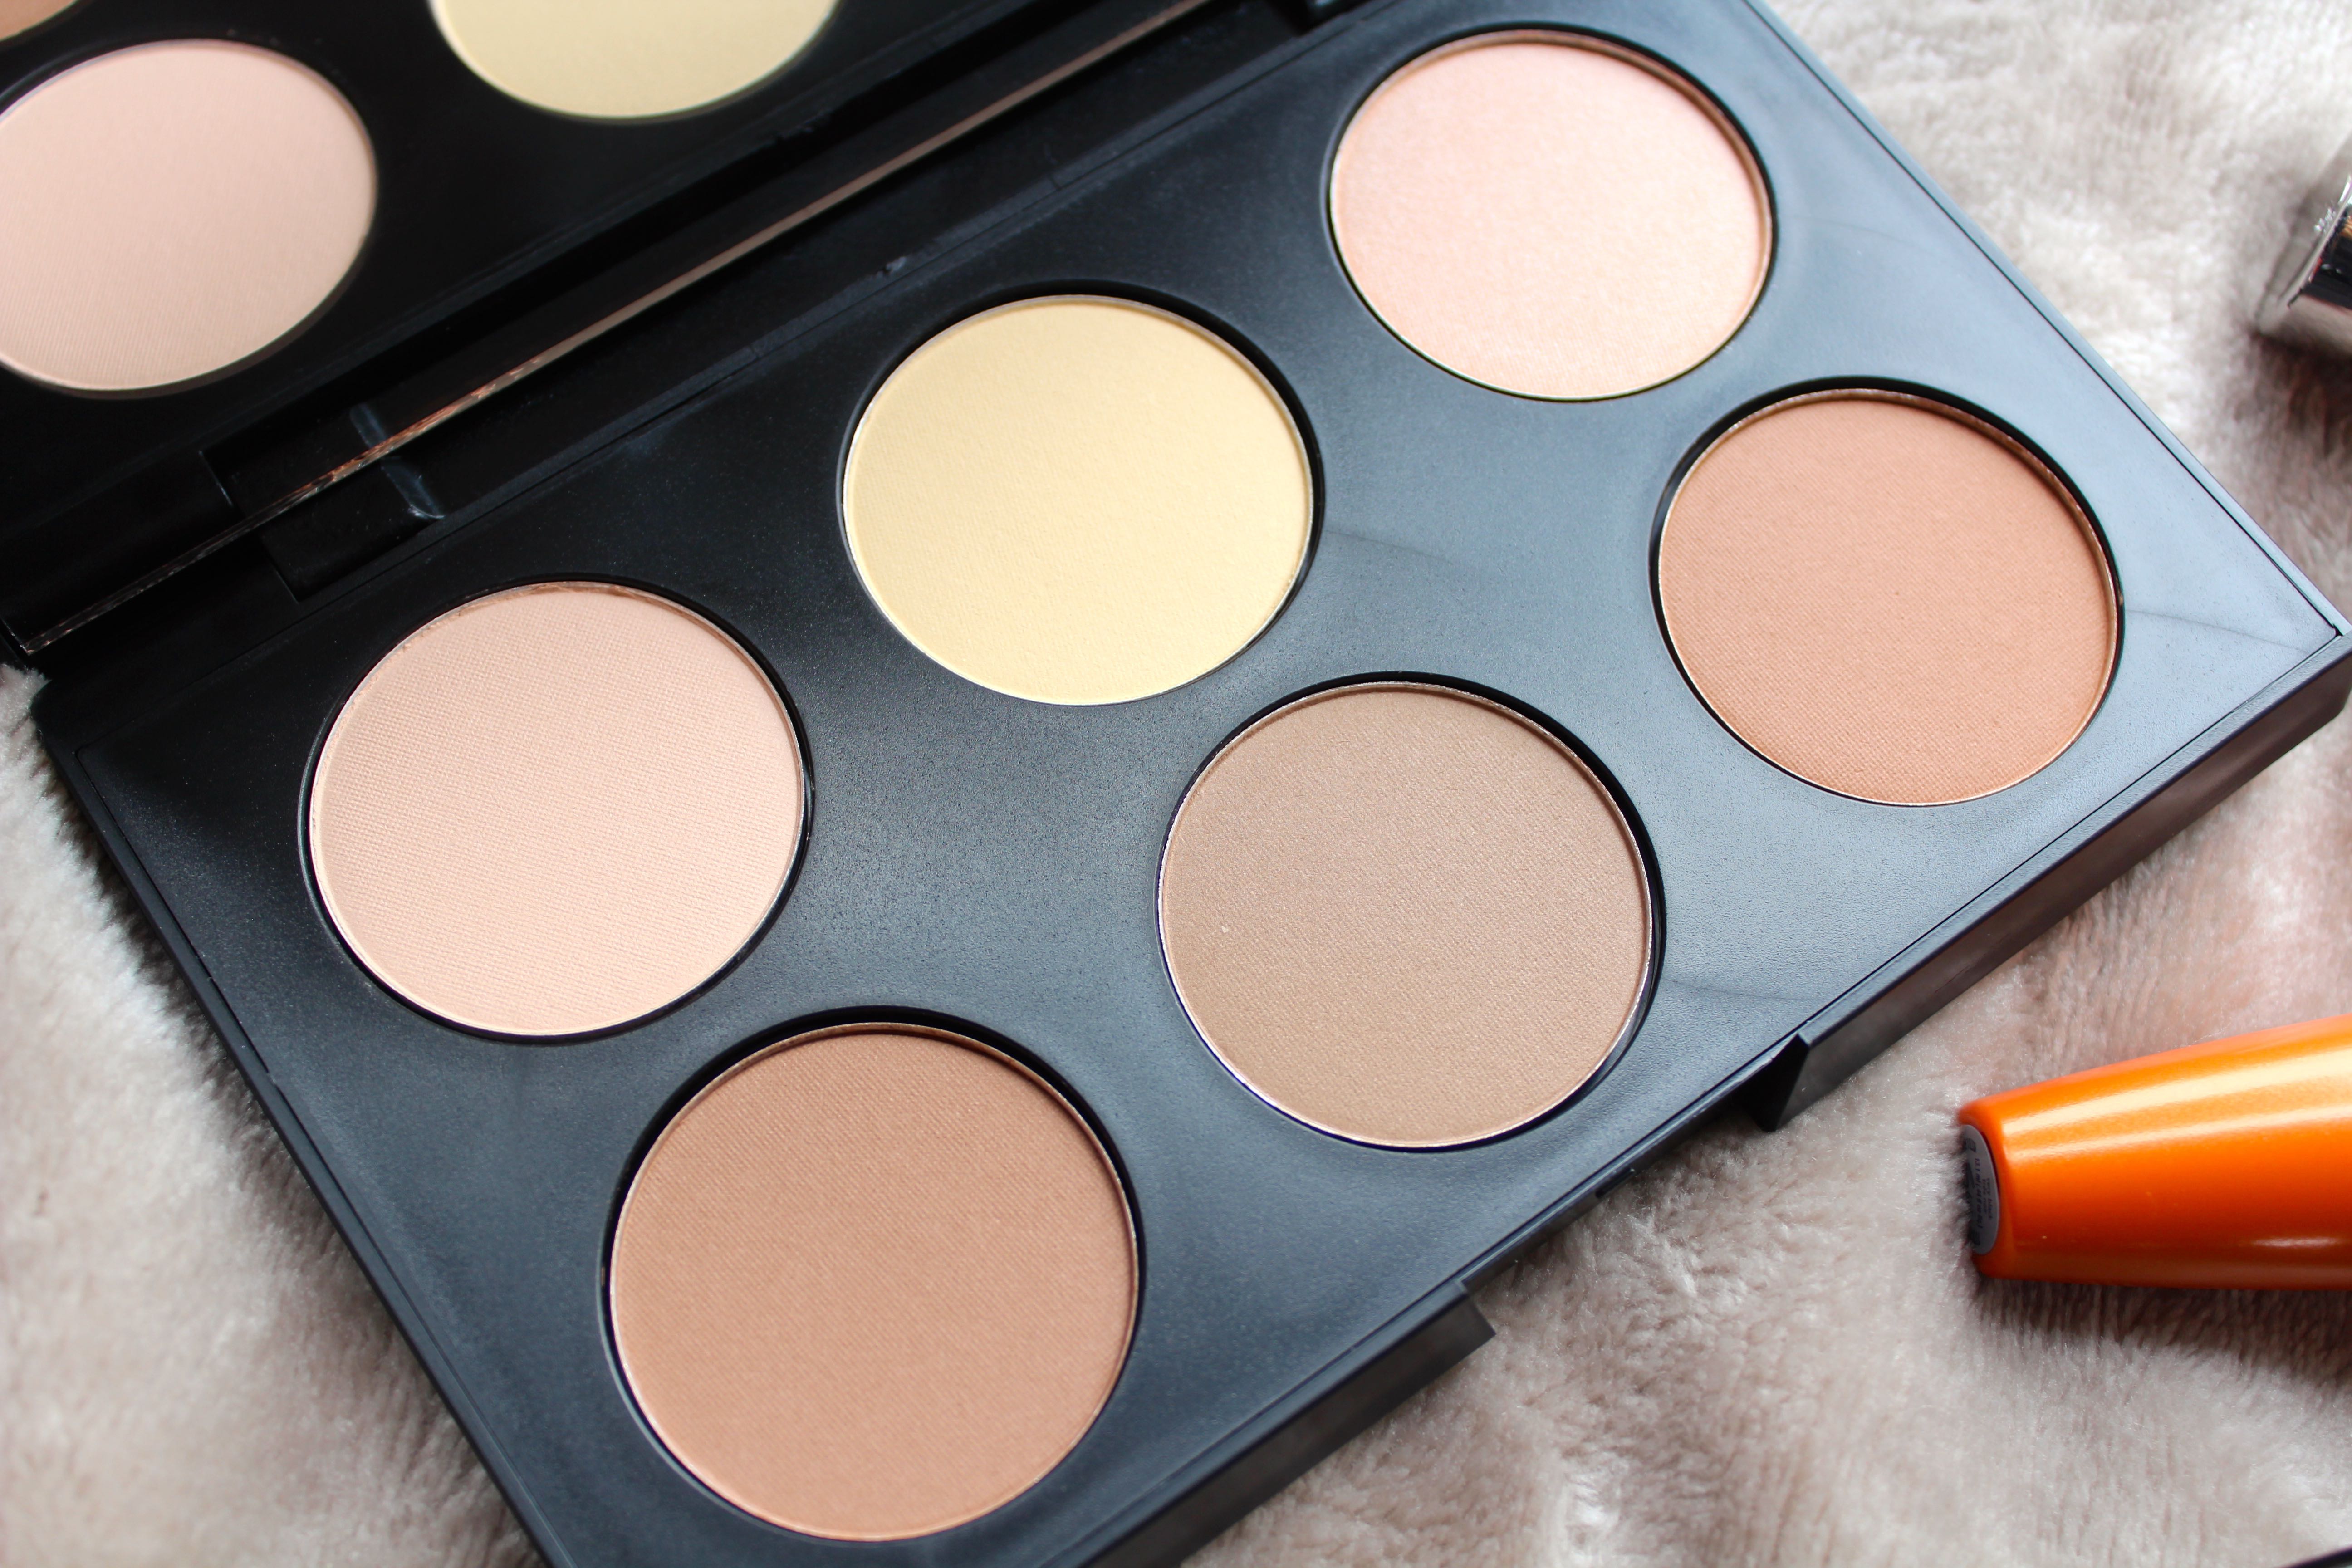 Australis AC on Tour Contour & Highlight Kit Review by Facemadeup